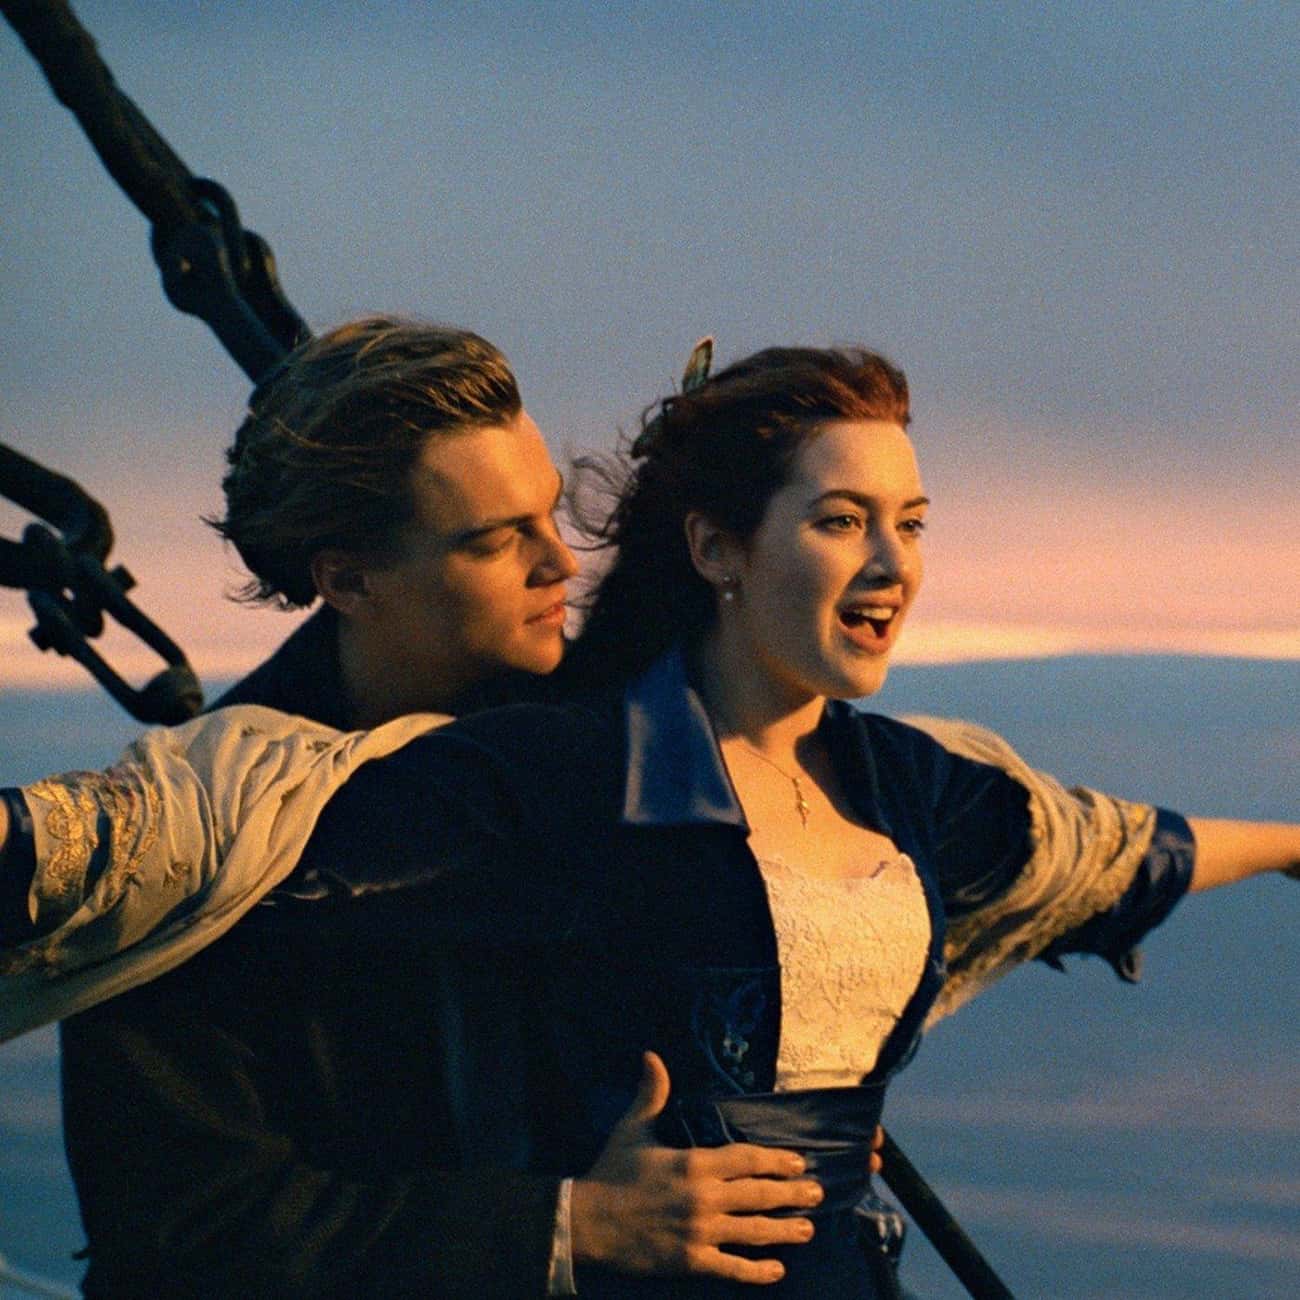 The 'King Of The World' Line In 'Titanic' Was Made Up On The Spot